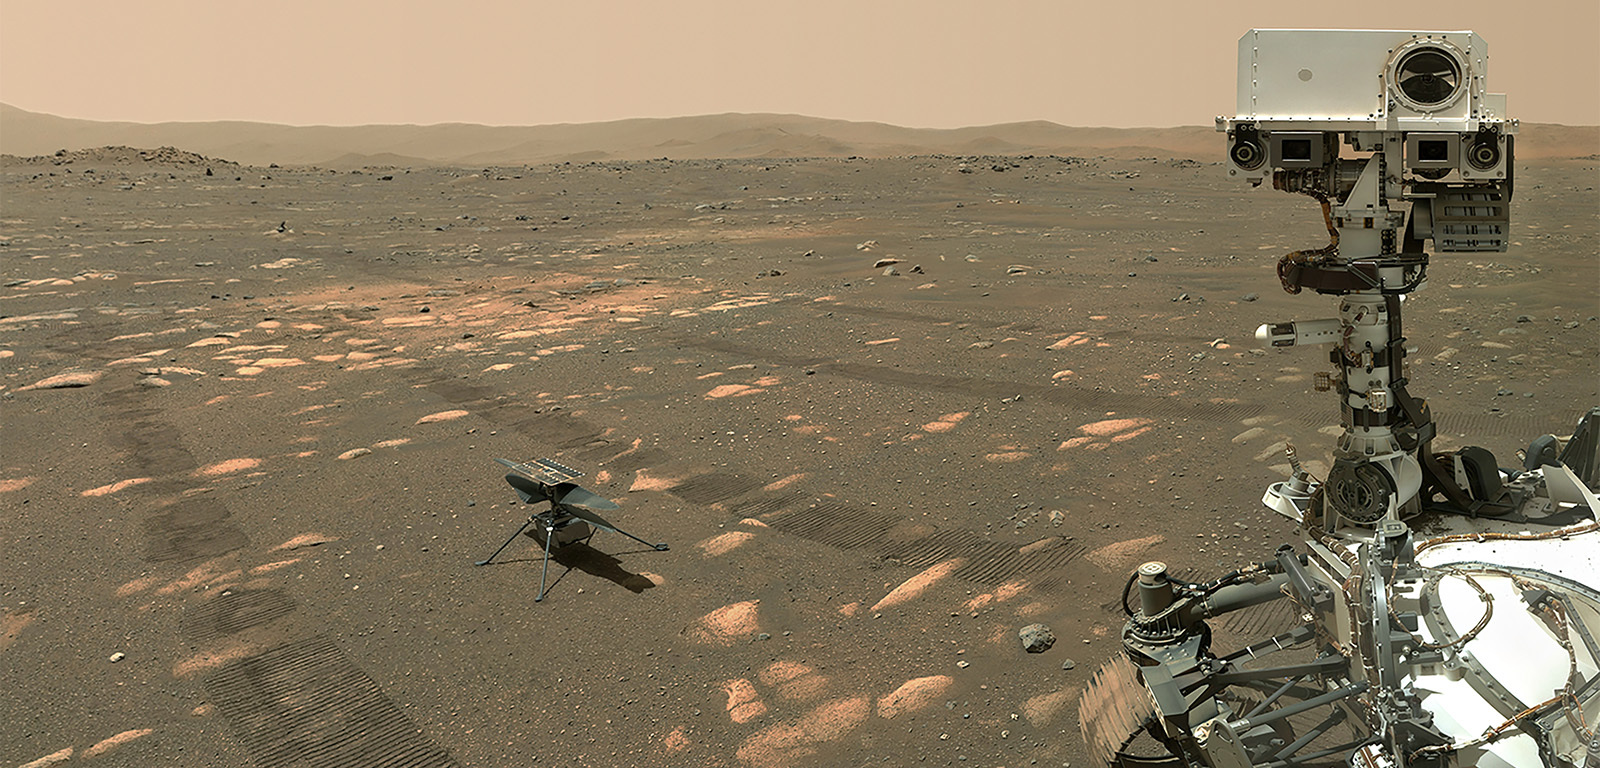 NASA’s Perseverance Mars rover took a selfie with the Ingenuity helicopter on the Martian surface, seen here about 13 feet (3.9 meters) from the rover.